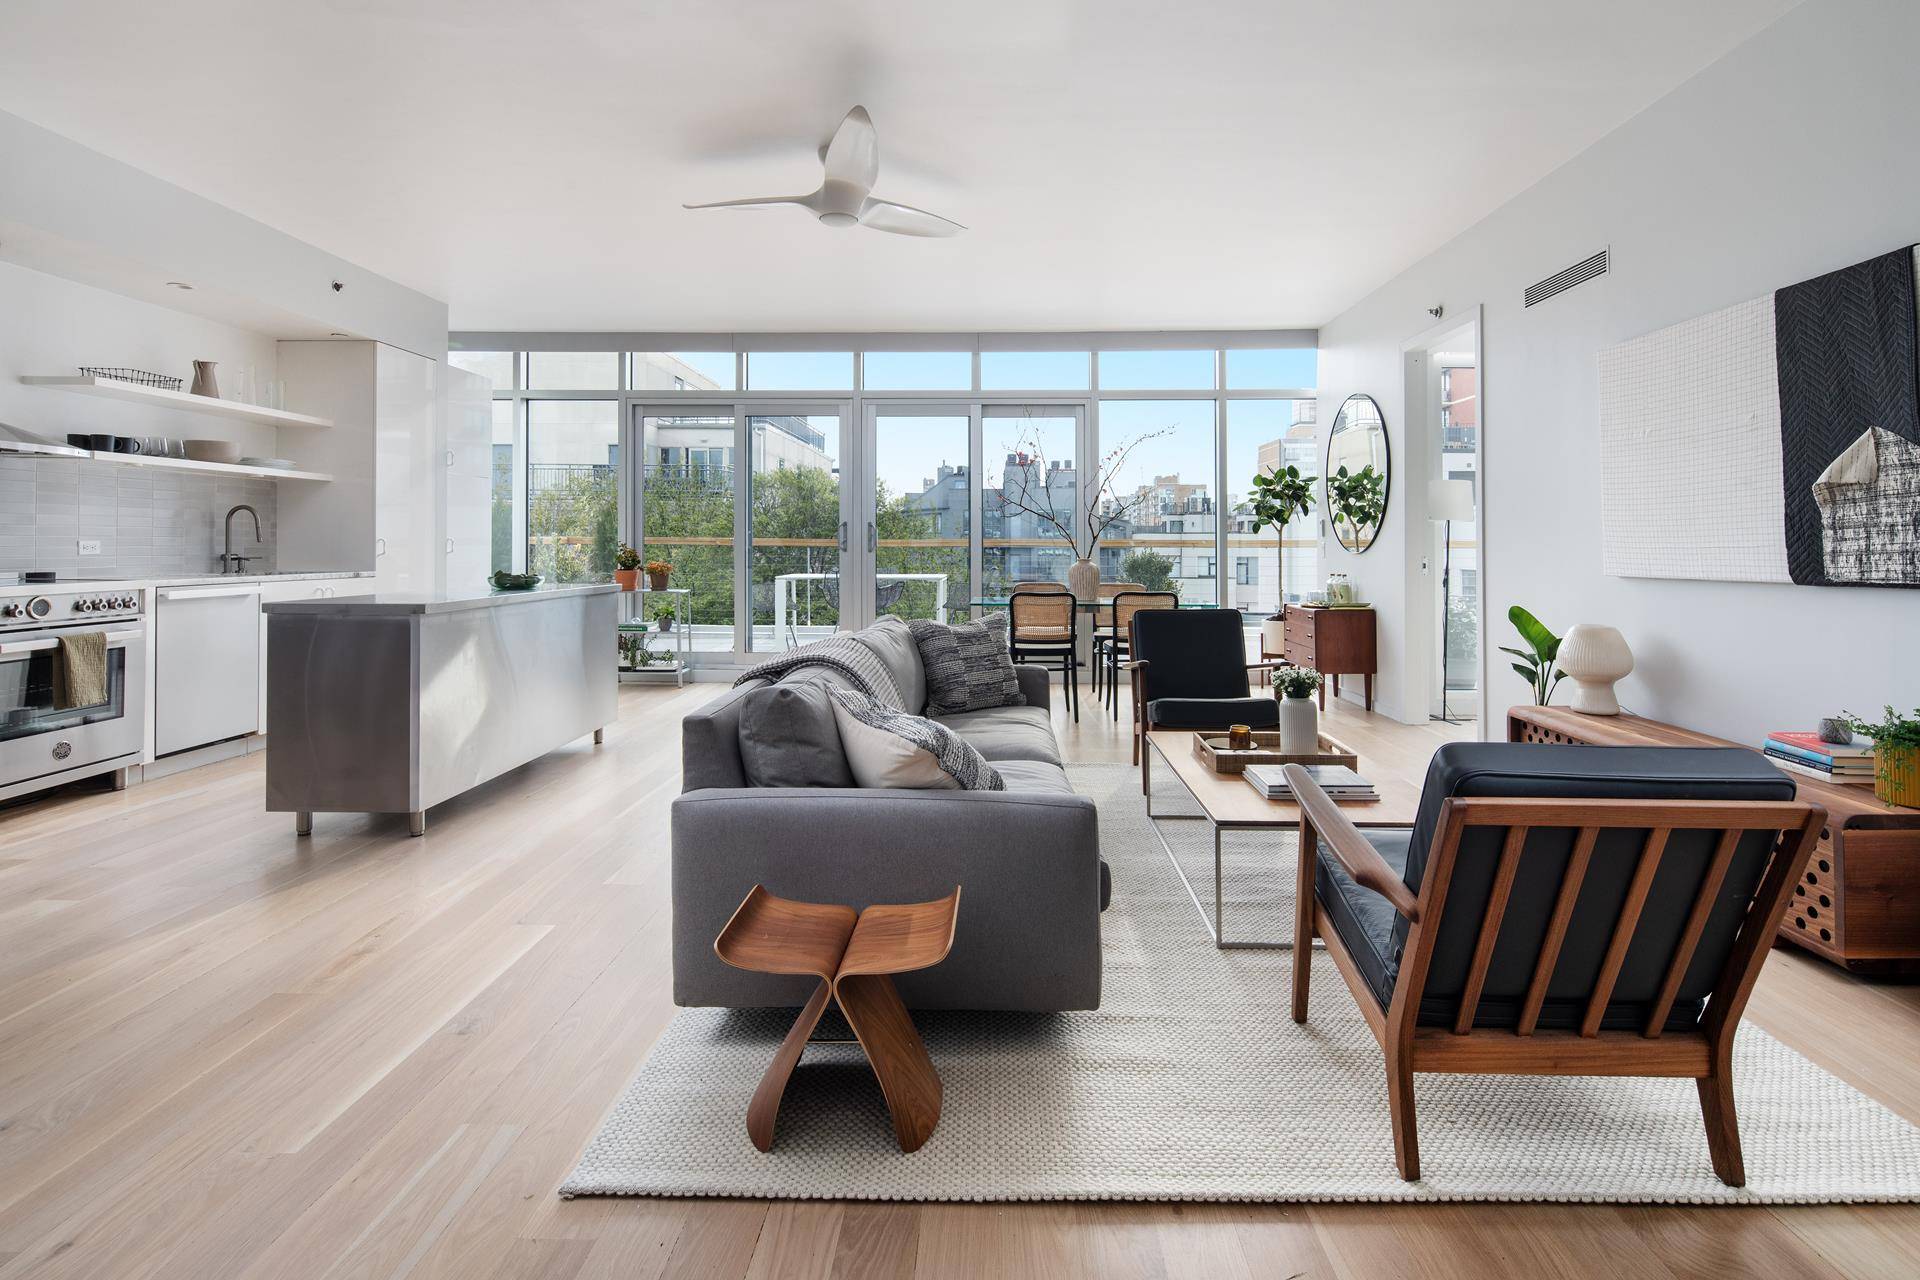 Effortless Park Slope living awaits in this beautifully updated, sun splashed two bedroom, two bathroom condominium featuring the city trifecta private outdoor space, storage and parking.